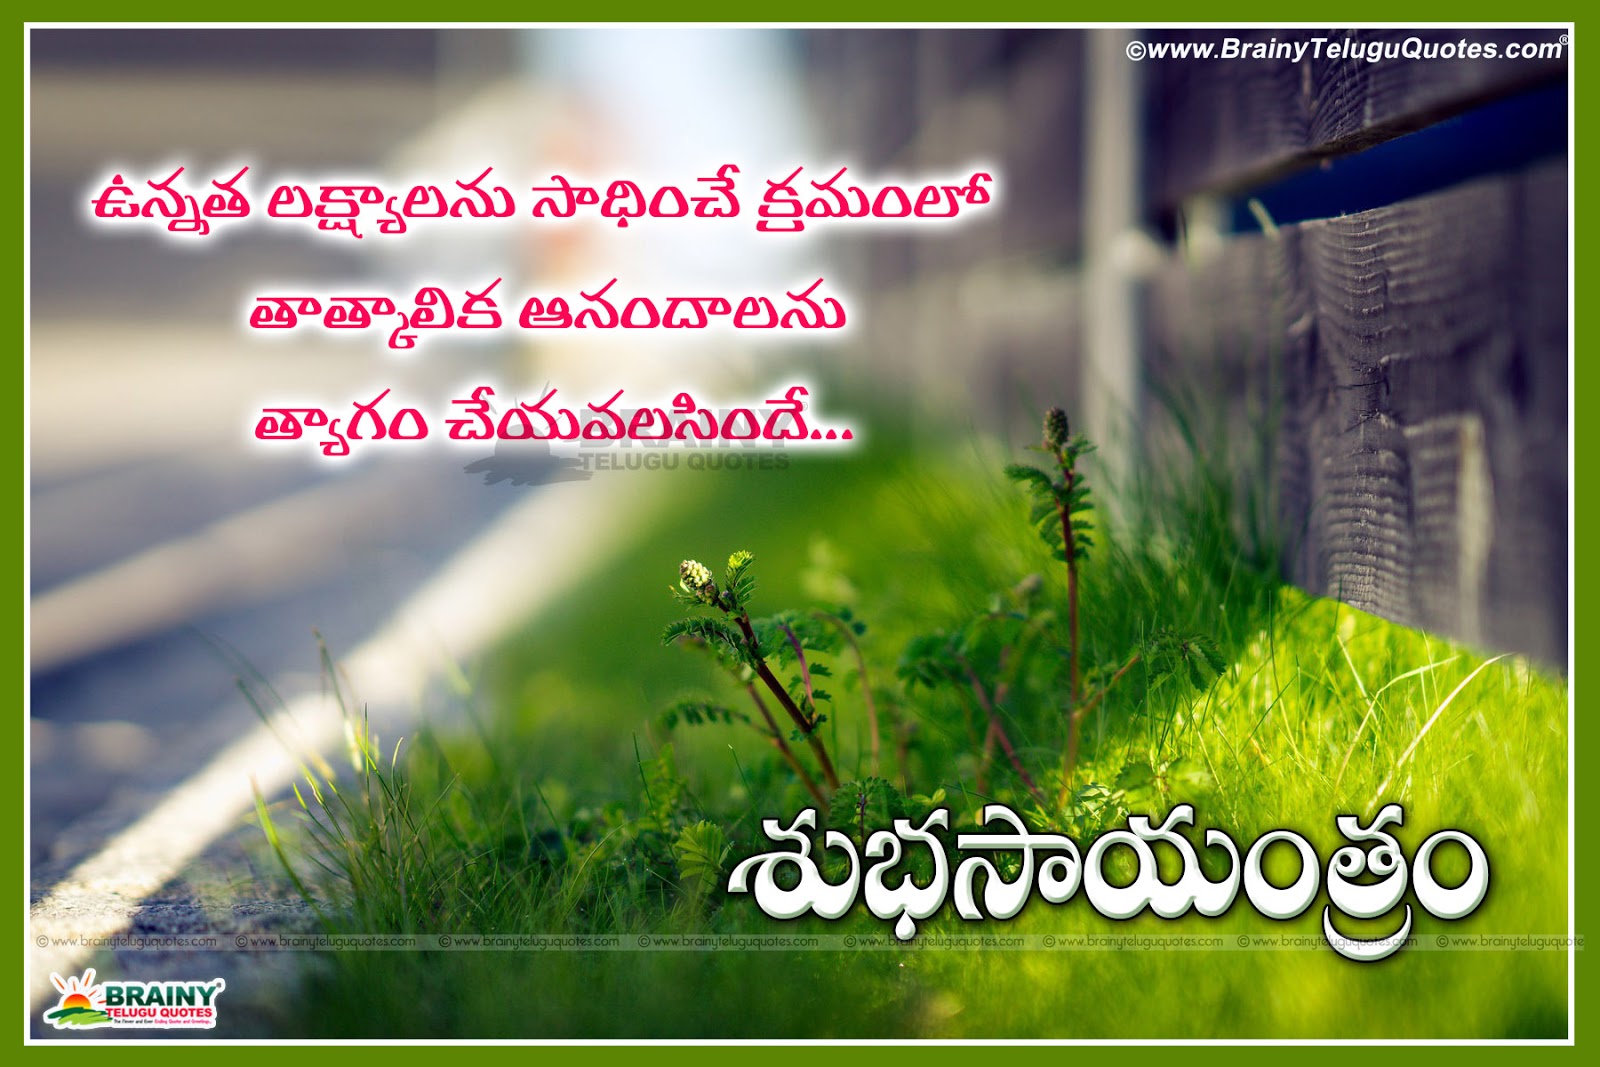 Good Evening Gif Images Beautiful Good Evening Wallpapers With Inspirational Telugu Quotes Brainyteluguquotes Comtelugu Quotes English Quotes Hindi Quotes Tamil Quotes Greetings